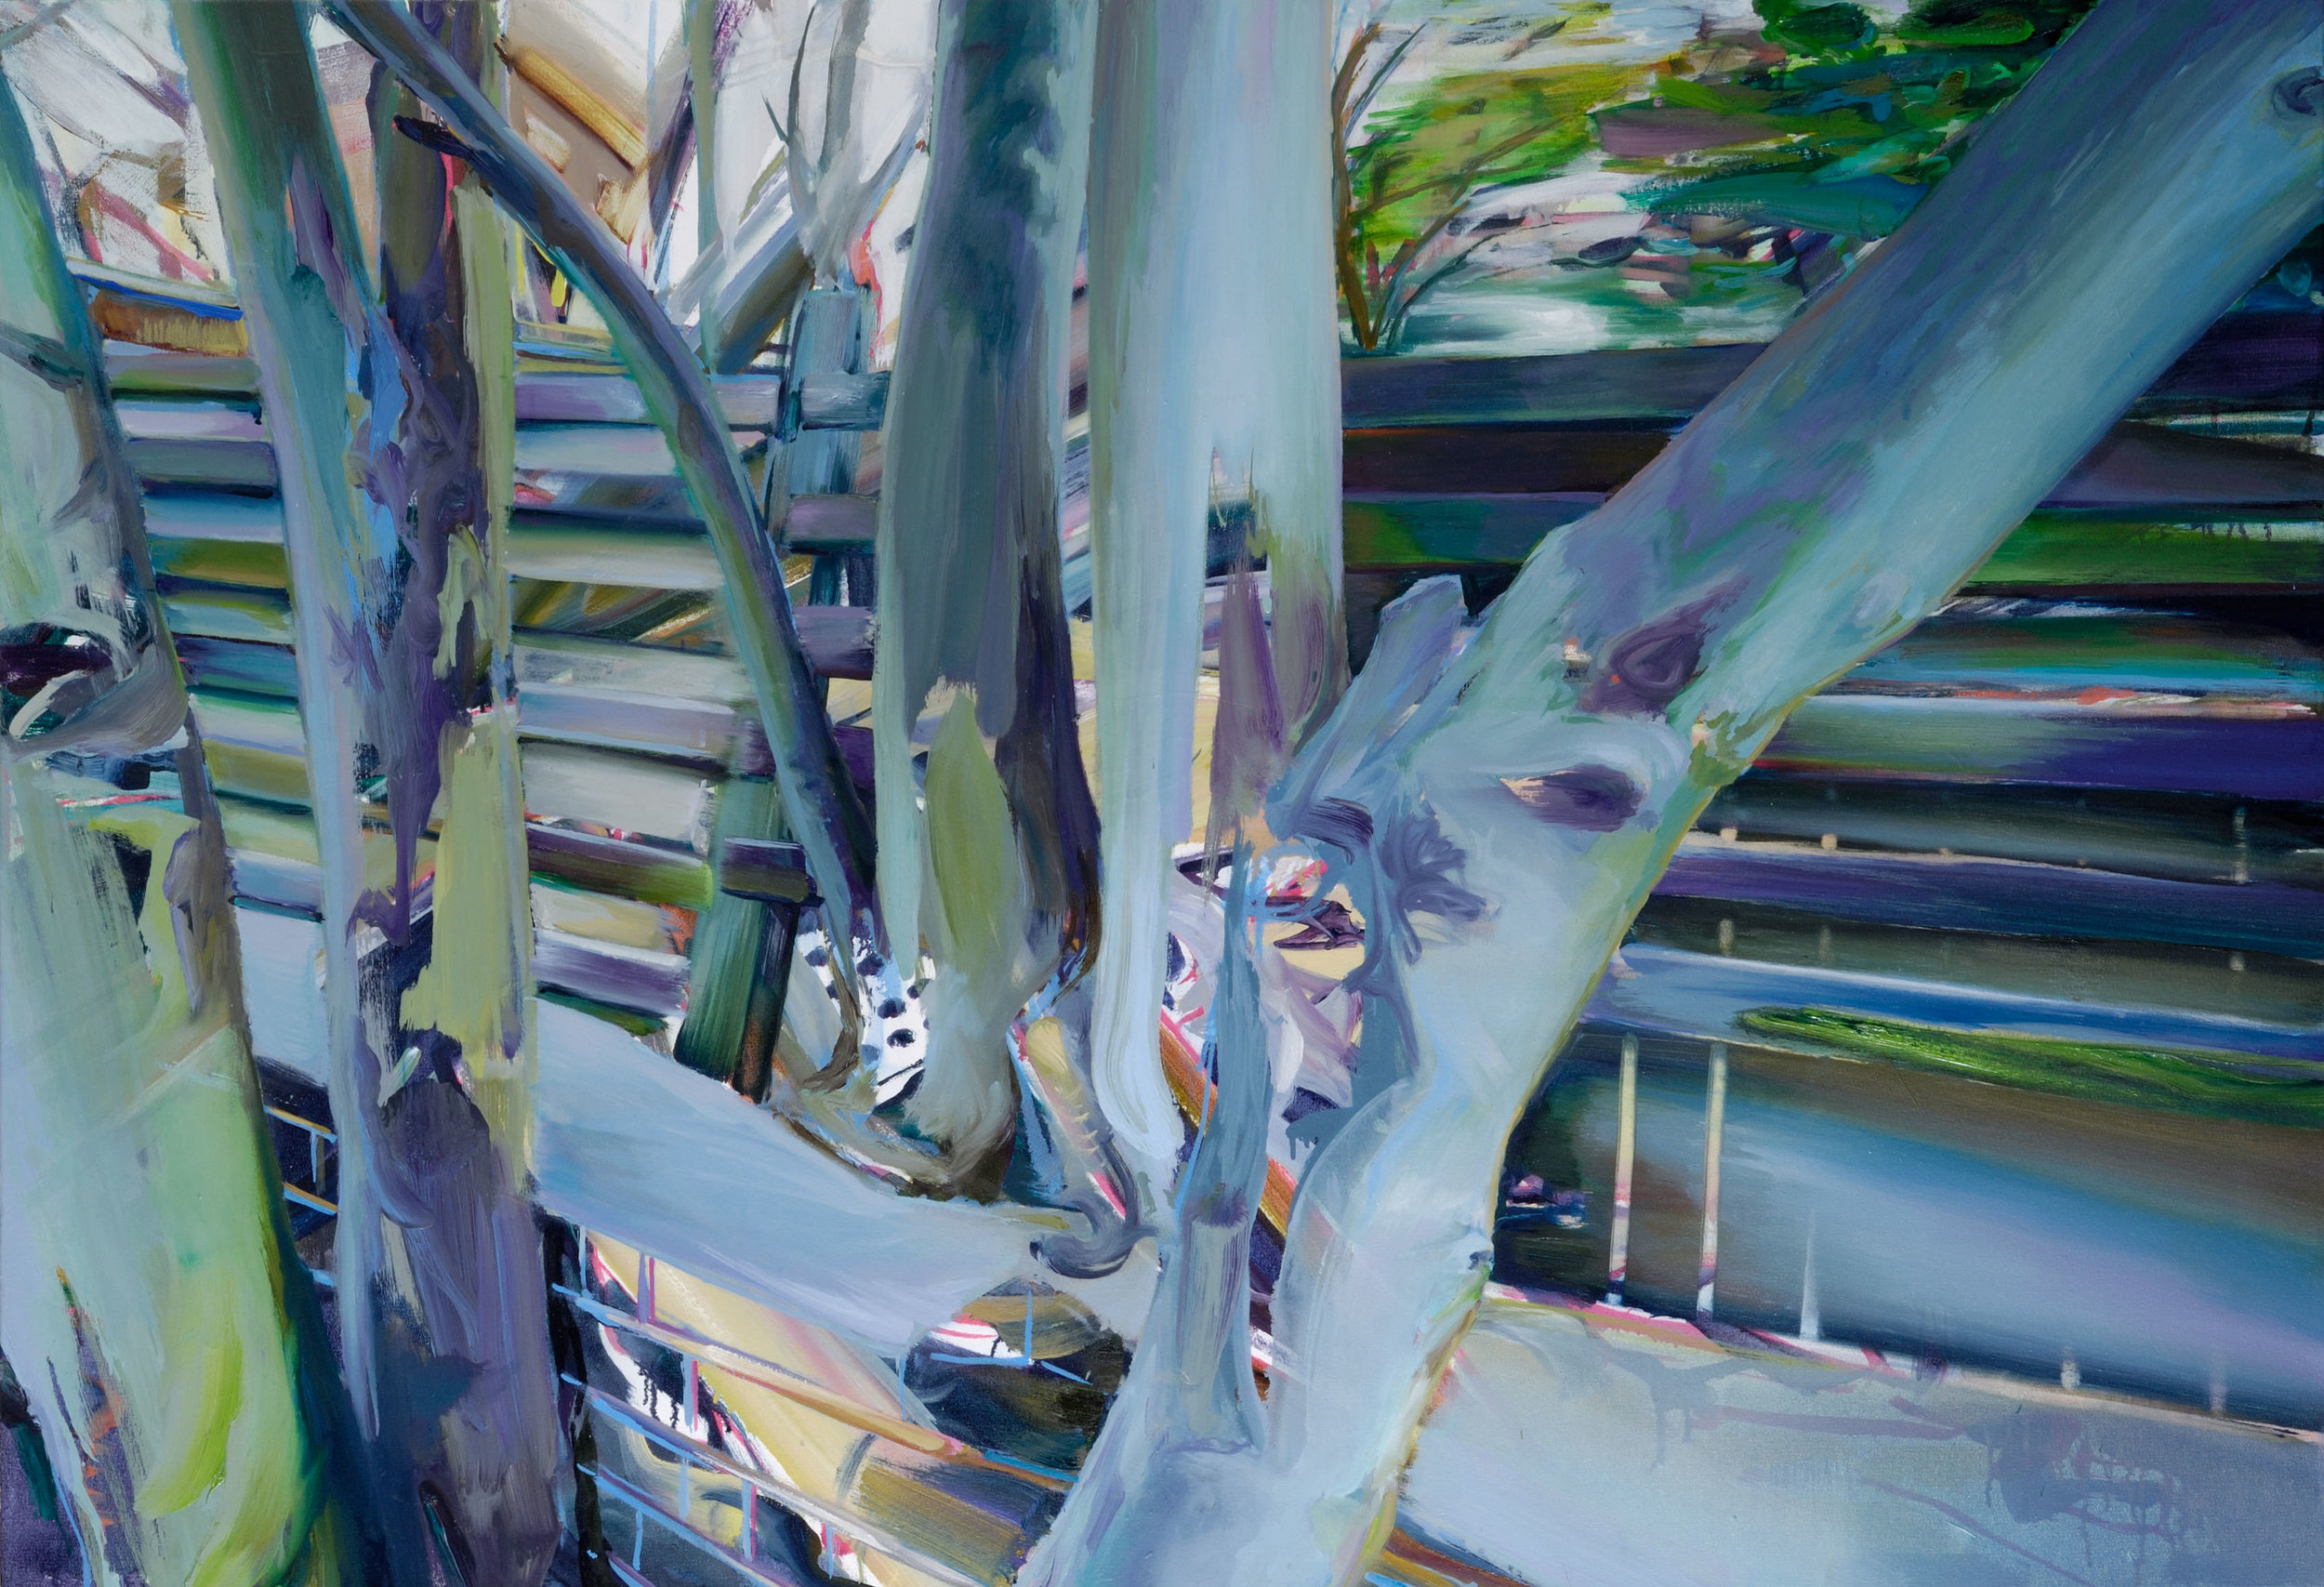   Fence(2) , 2008, oil on canvas, 89 x 130 cm. Private collection, France 